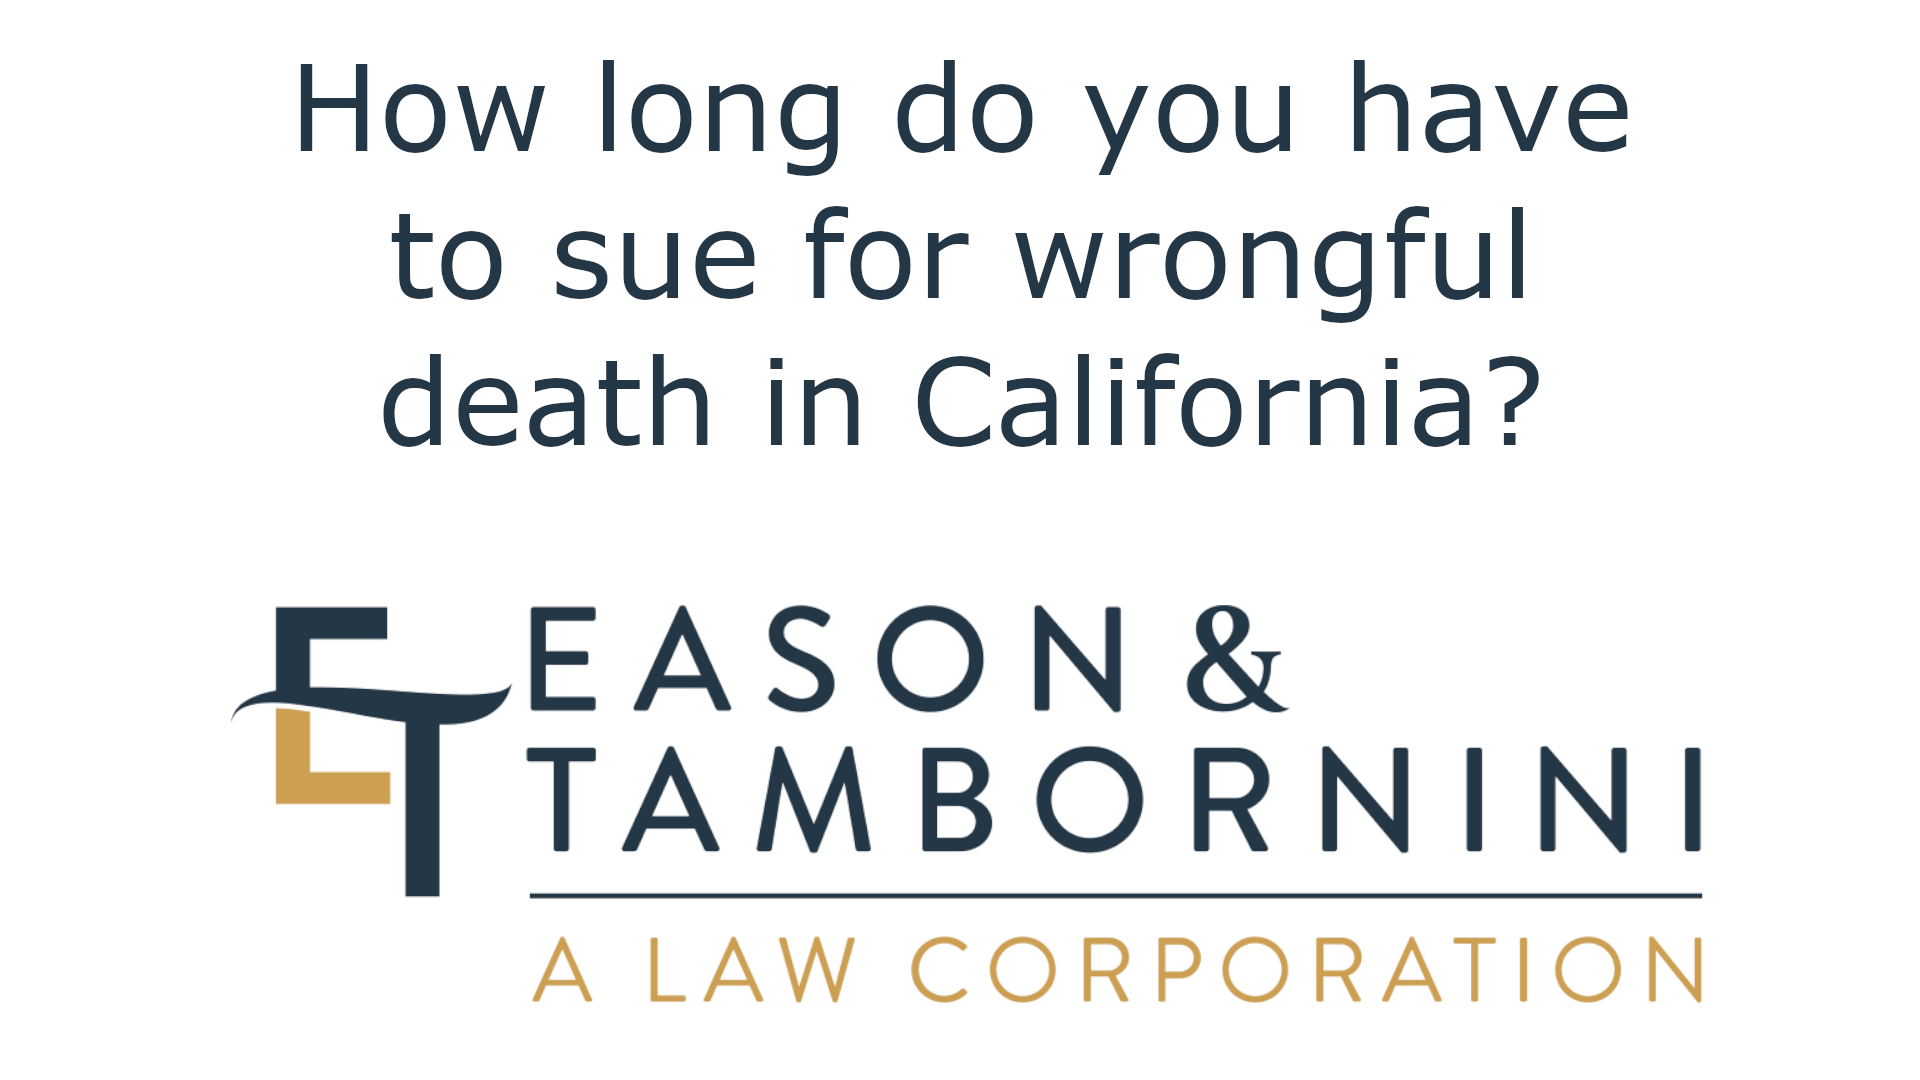 How long do you have to sue for wrongful death in California?